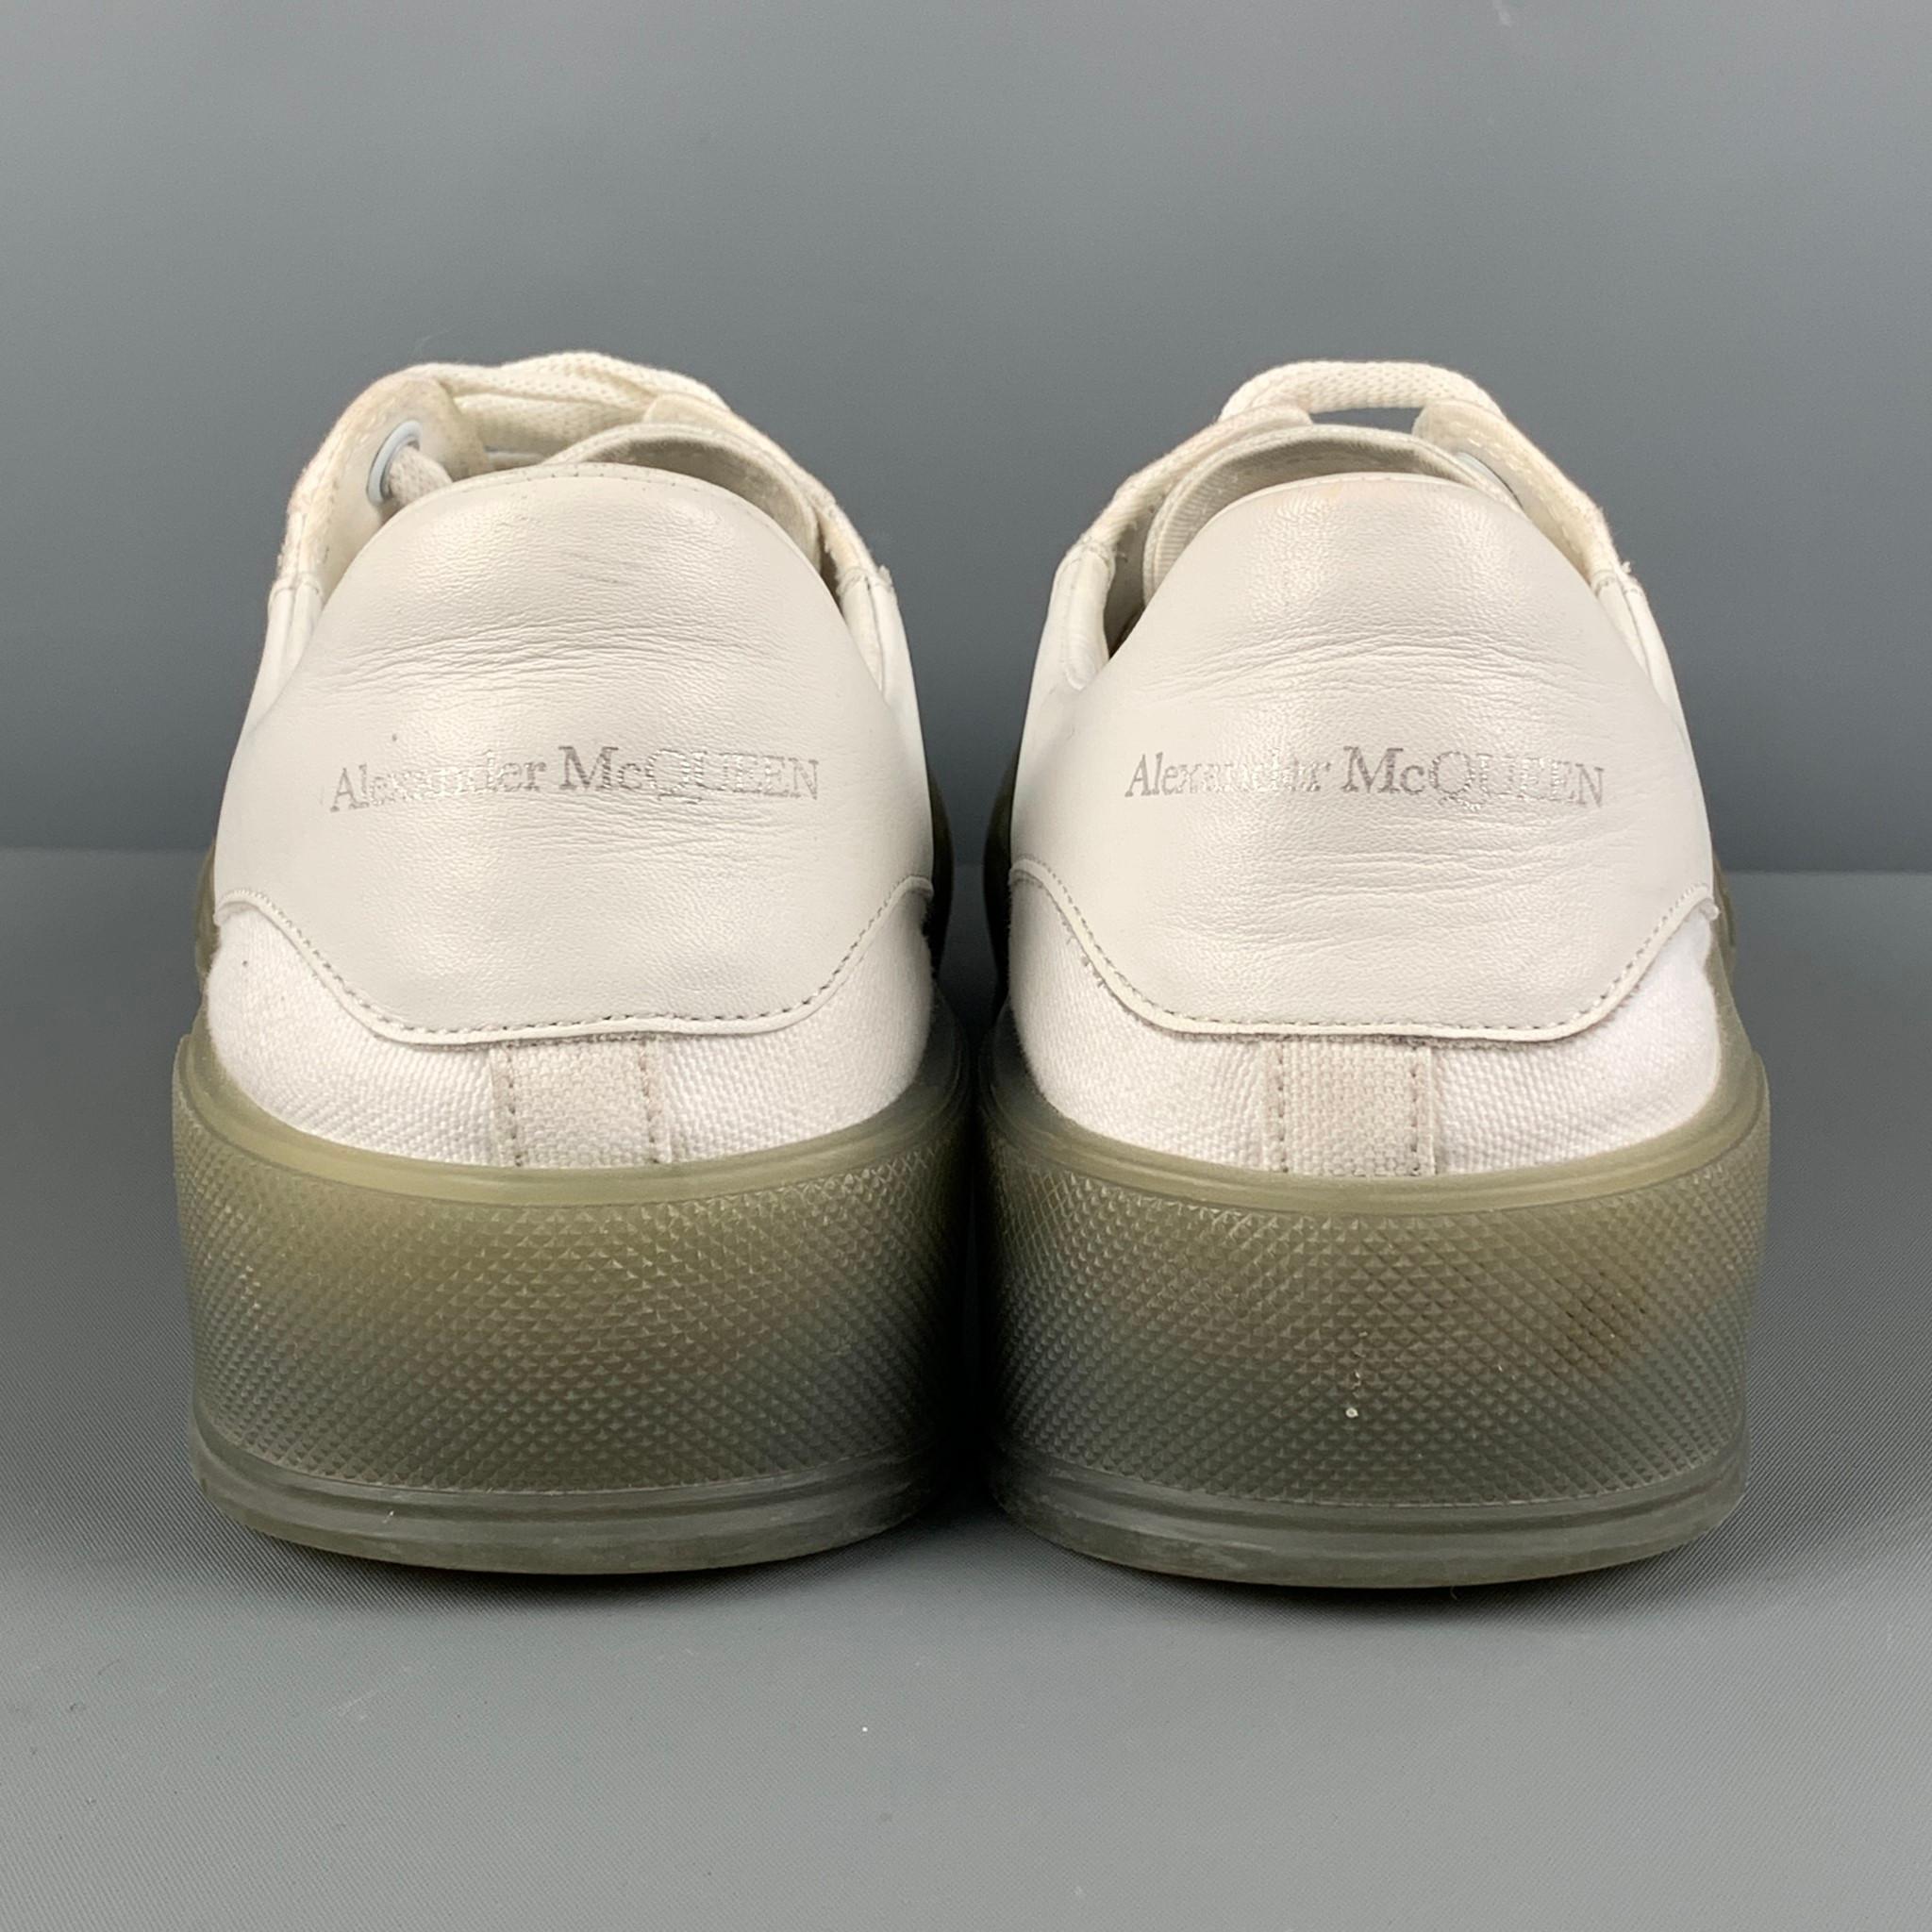 ALEXANDER MCQUEEN Size 8 White Olive Canvas Low Top Plimsoll Sneakers 1